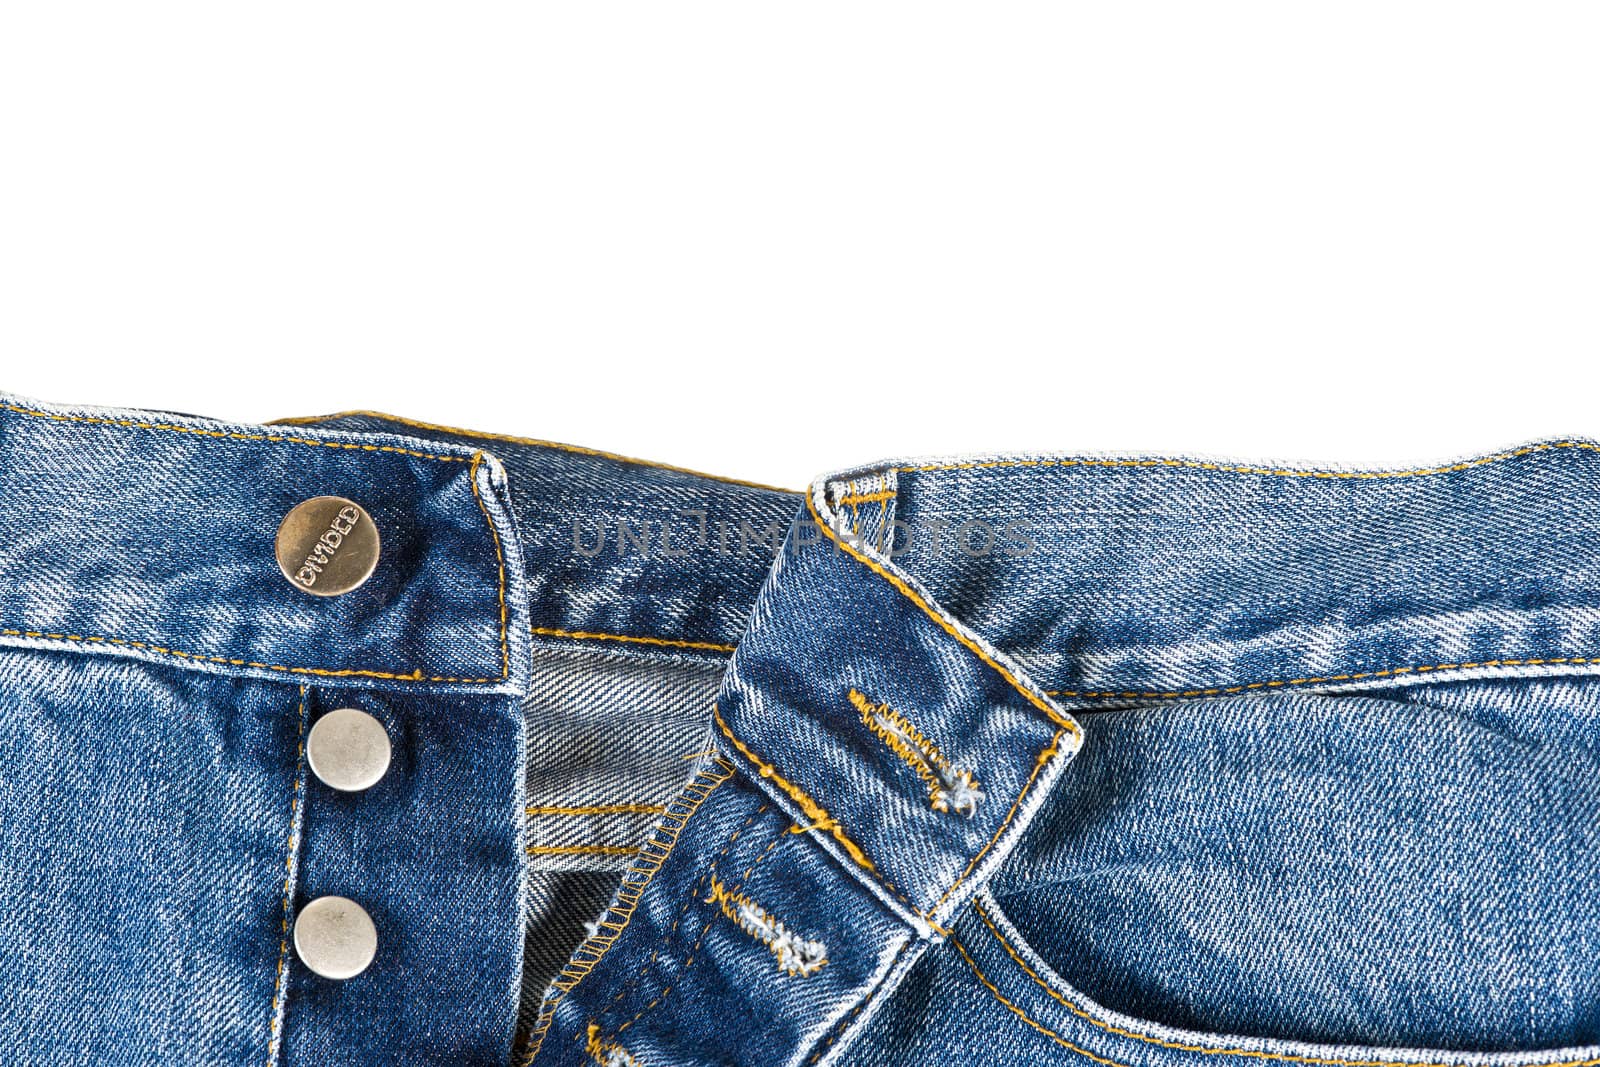 Fly of the jeans with button closure by angelsimon